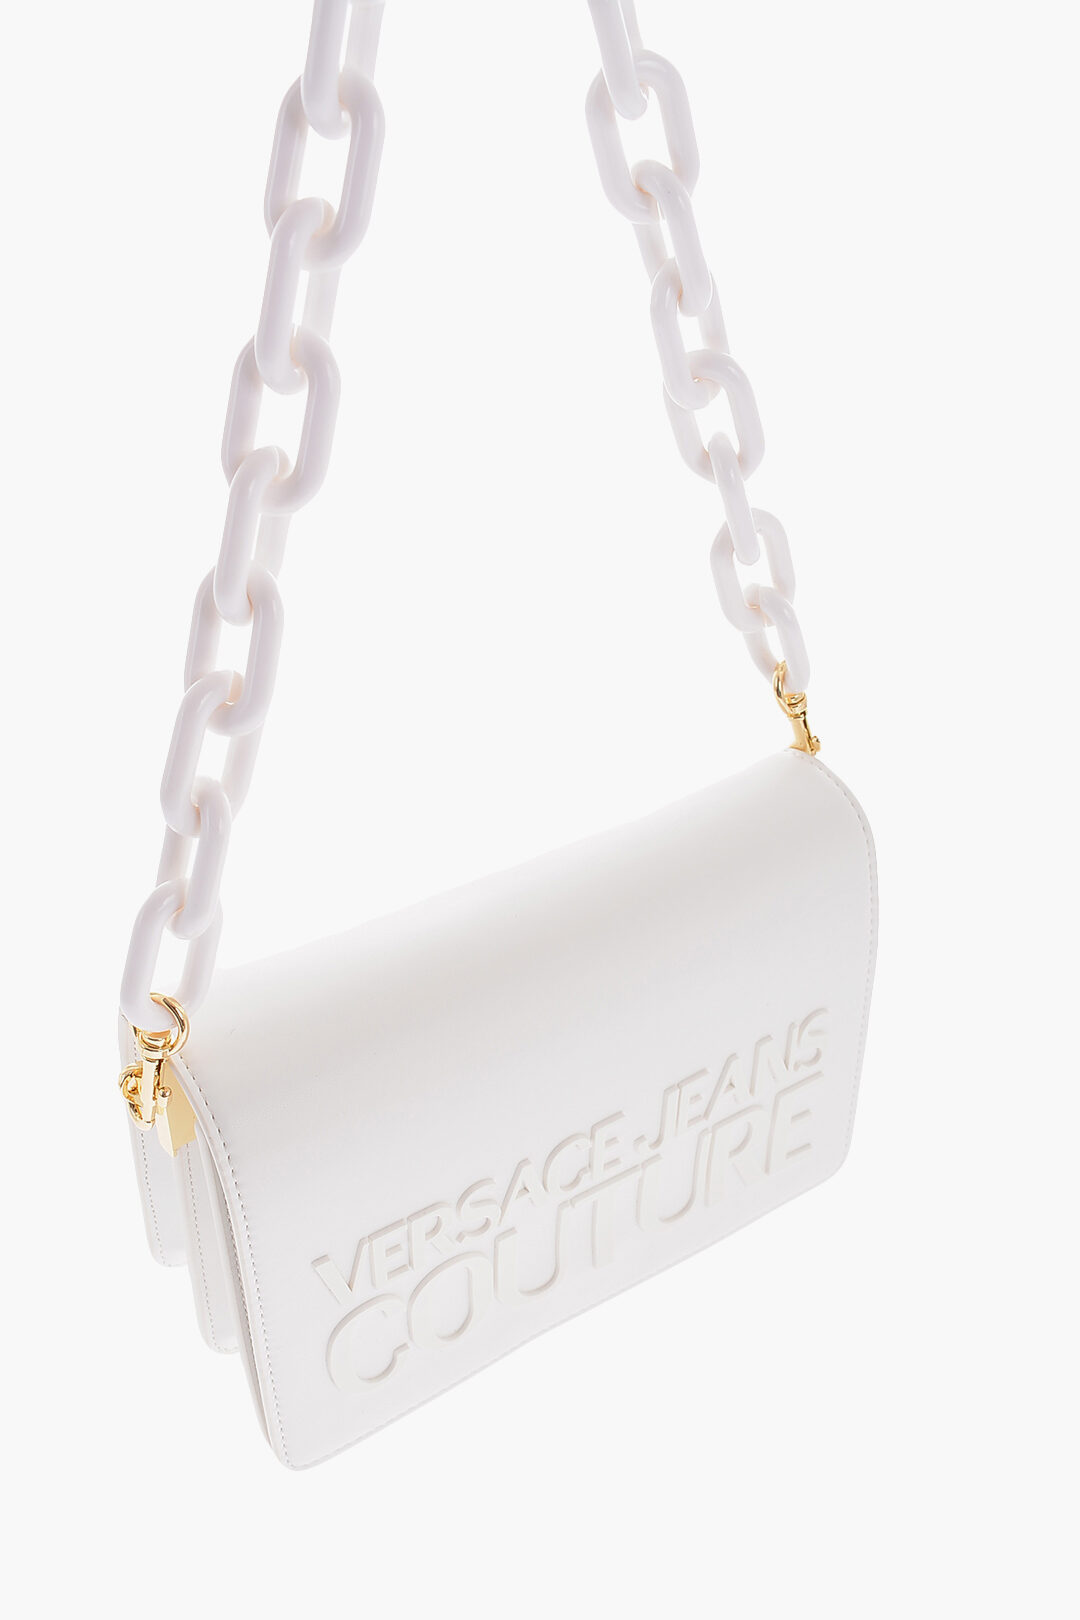 Versace Jeans Couture women's bag with chain Black